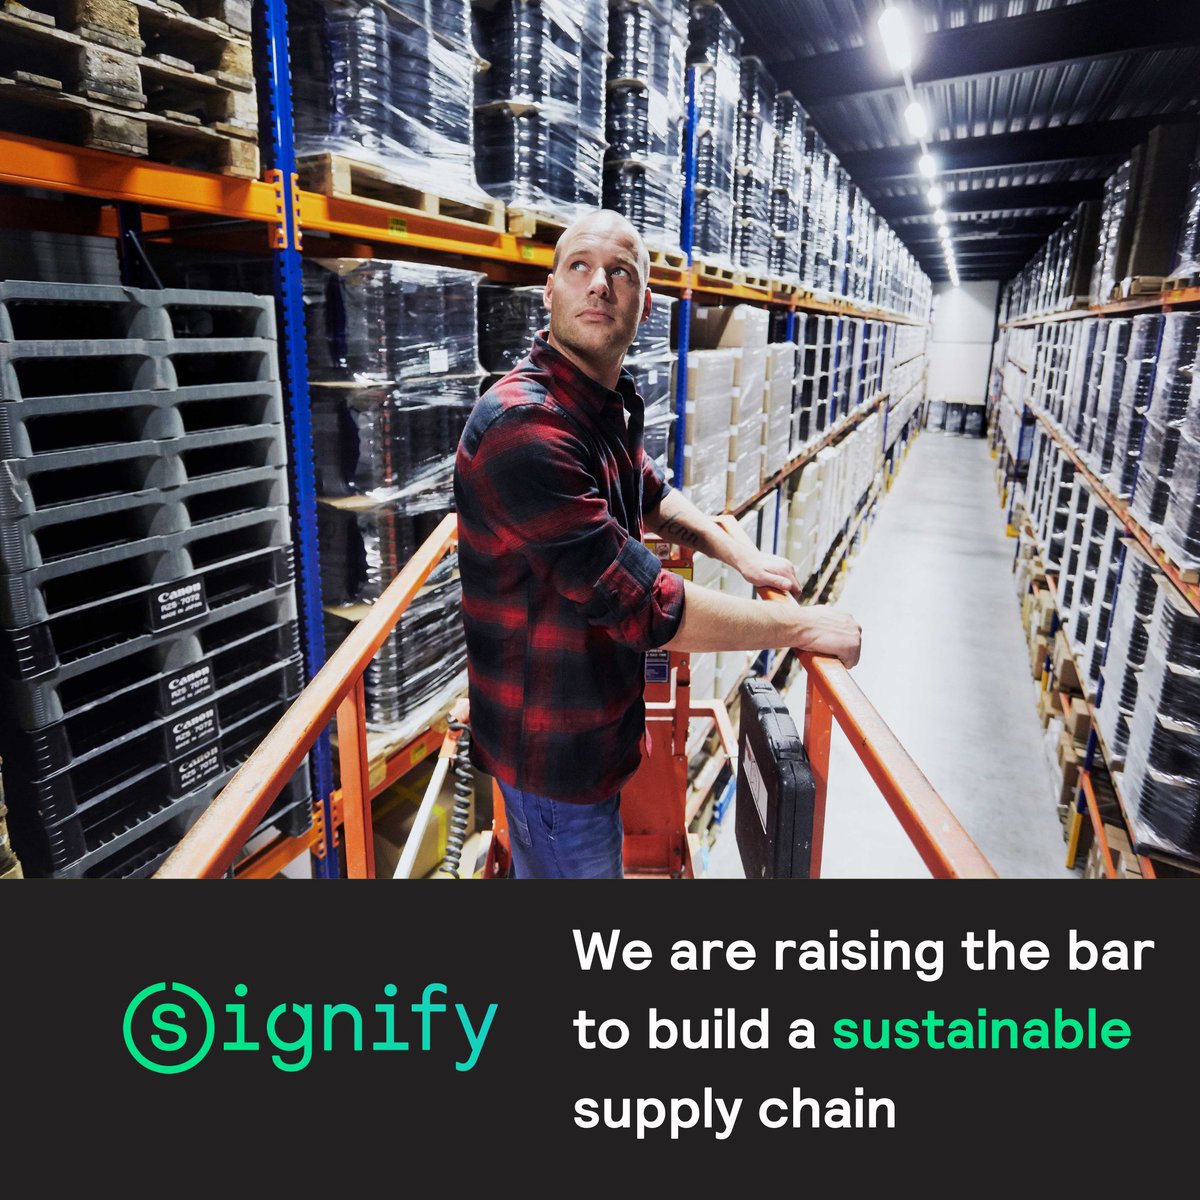 We partner with suppliers who prioritize sustainability as strongly as we do, those who provide a safe working environment, treat workers with respect and work in an environmentally responsible way. Find out more 👉 signify.co/3TmjRKs #BrighterLivesBetterWorld